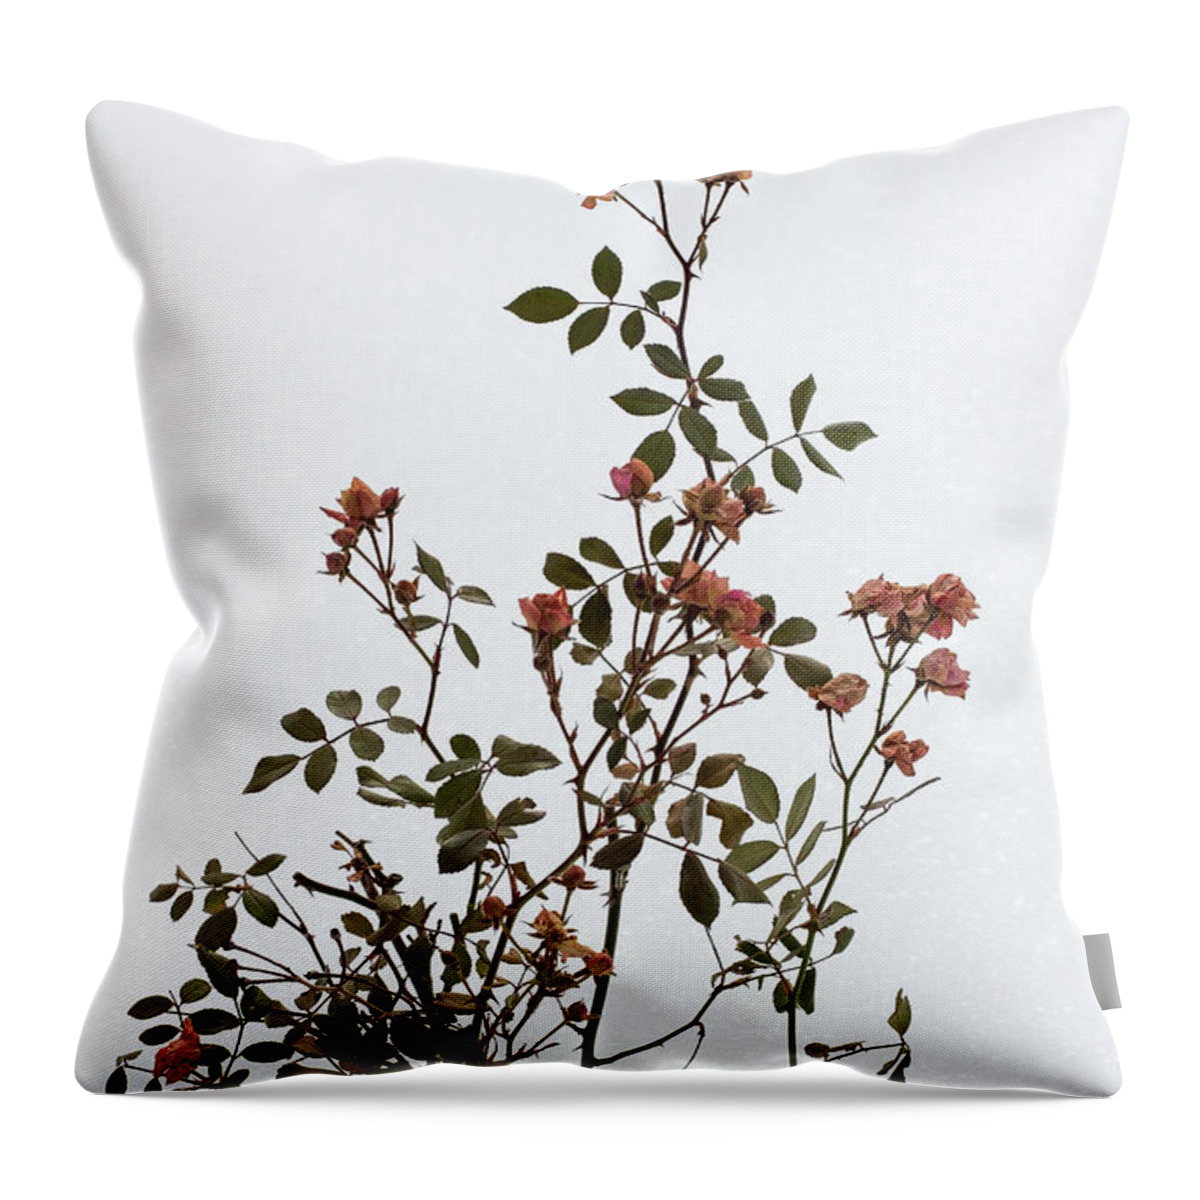 Flower Throw Pillow featuring the photograph Winter Ice Fairy Roses by Barbara McMahon